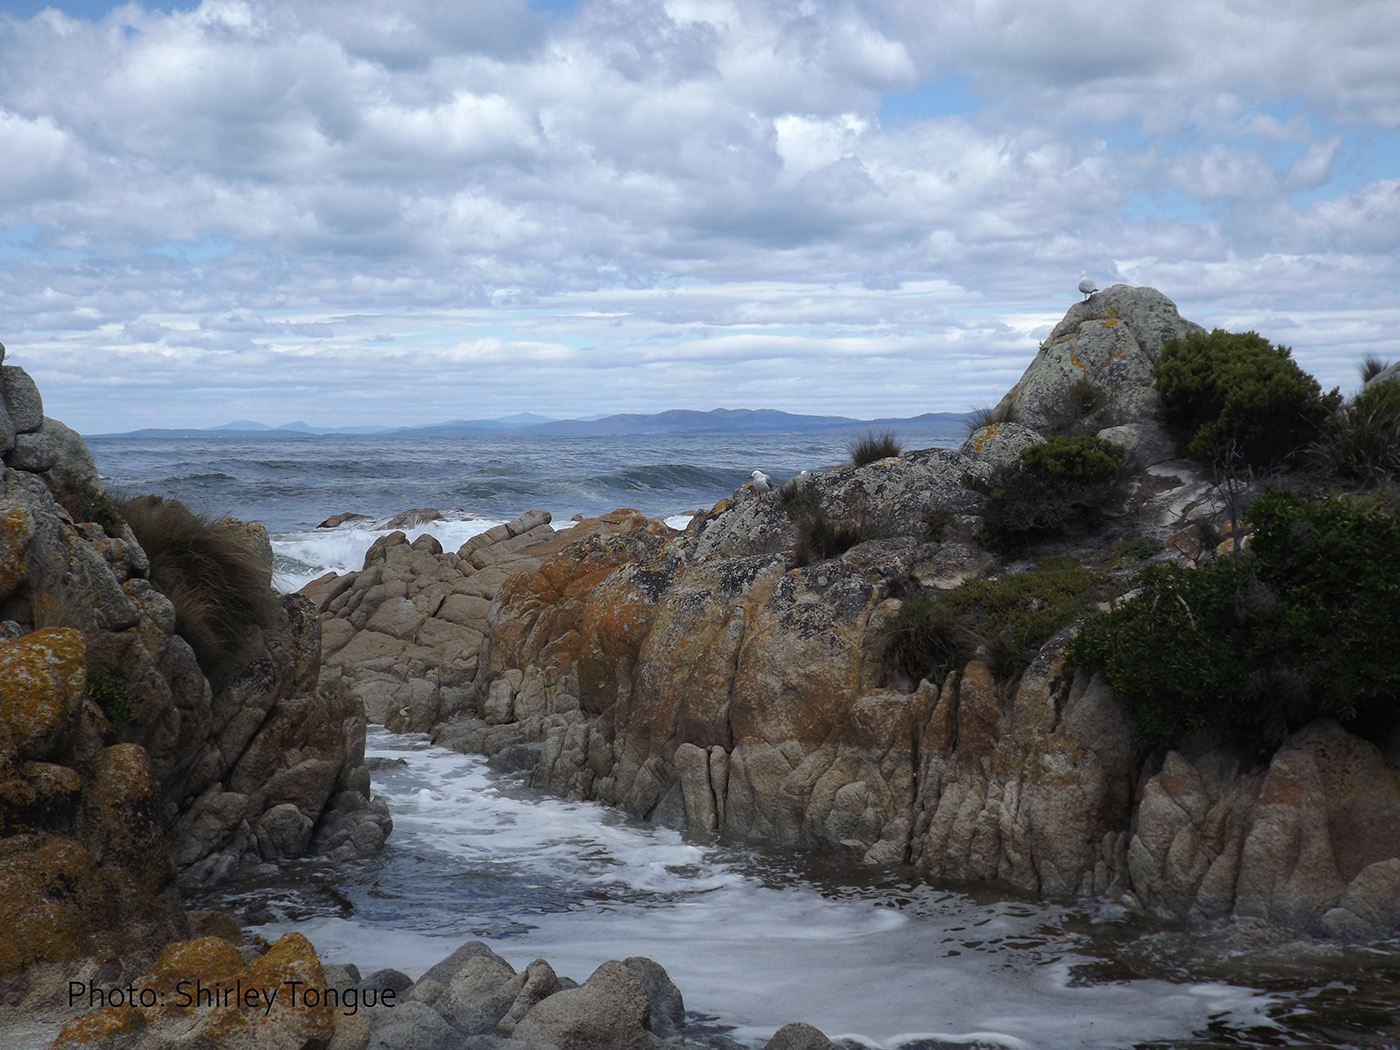 Bay of Fires © Shirley Tongue. Used with permission